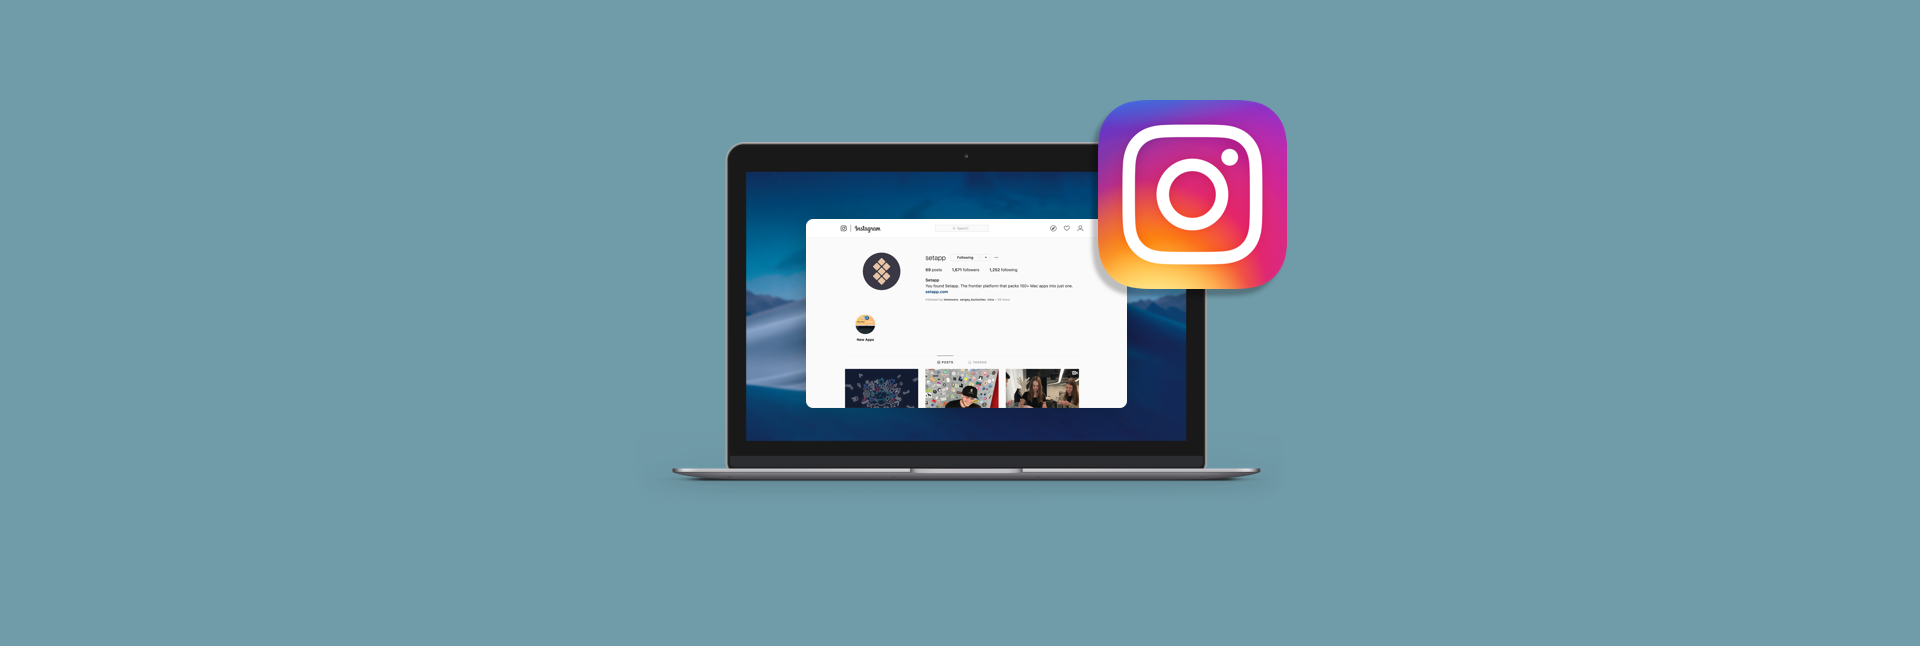 how to see instagram messages on mac